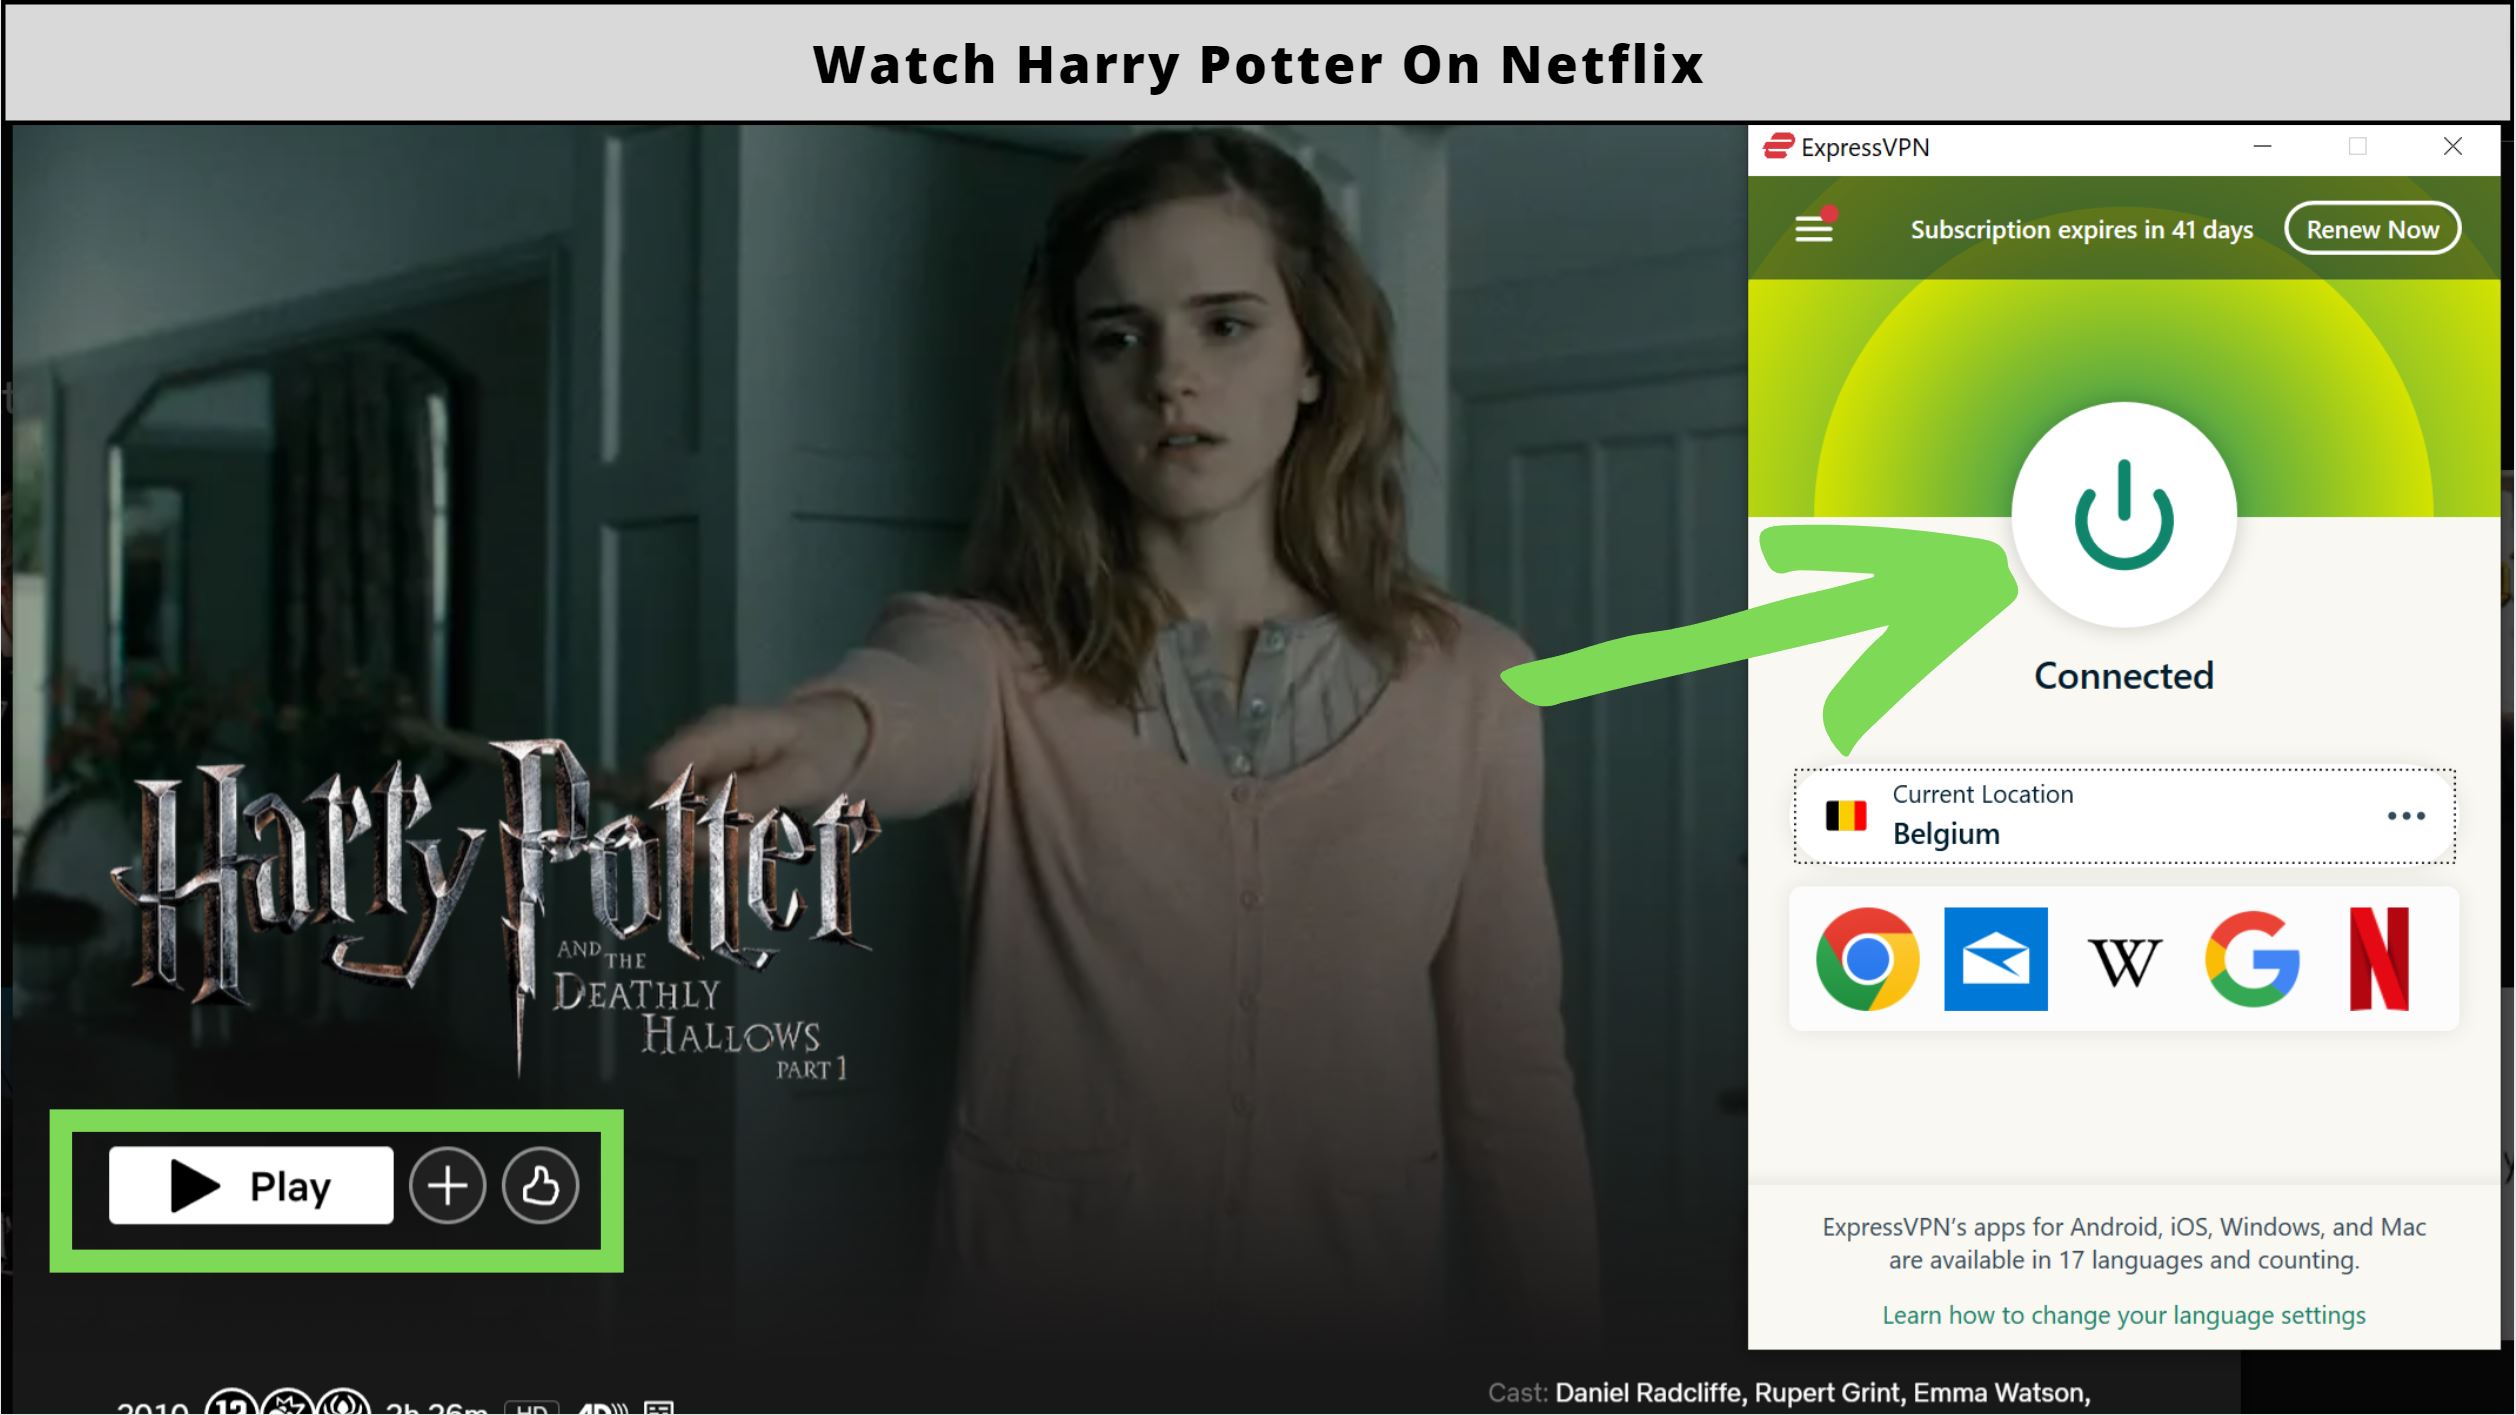 Is Harry Potter On Netflix? (YES) Here Is A Complete Guide